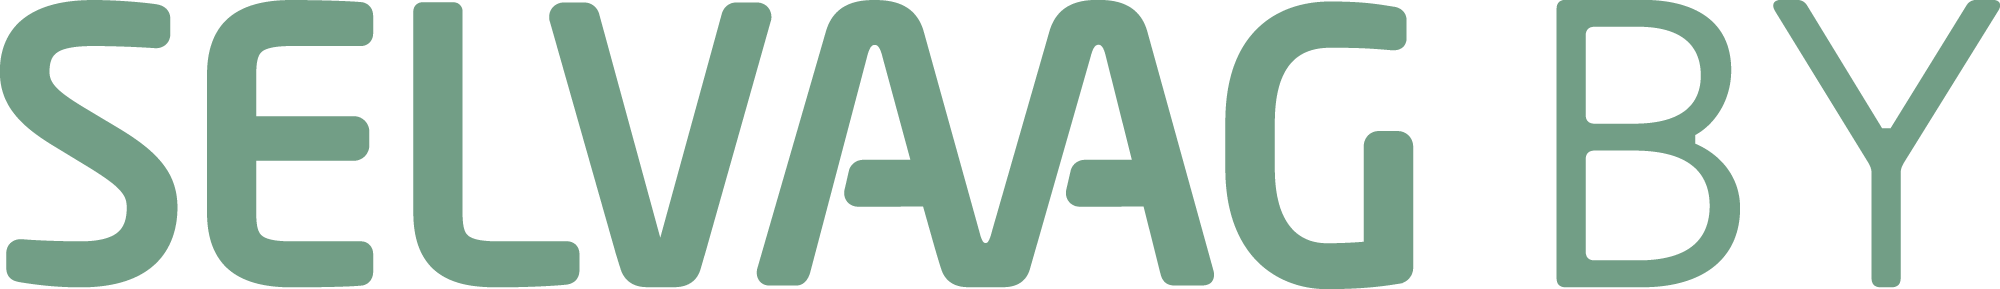 SELVAAG BY AS logo